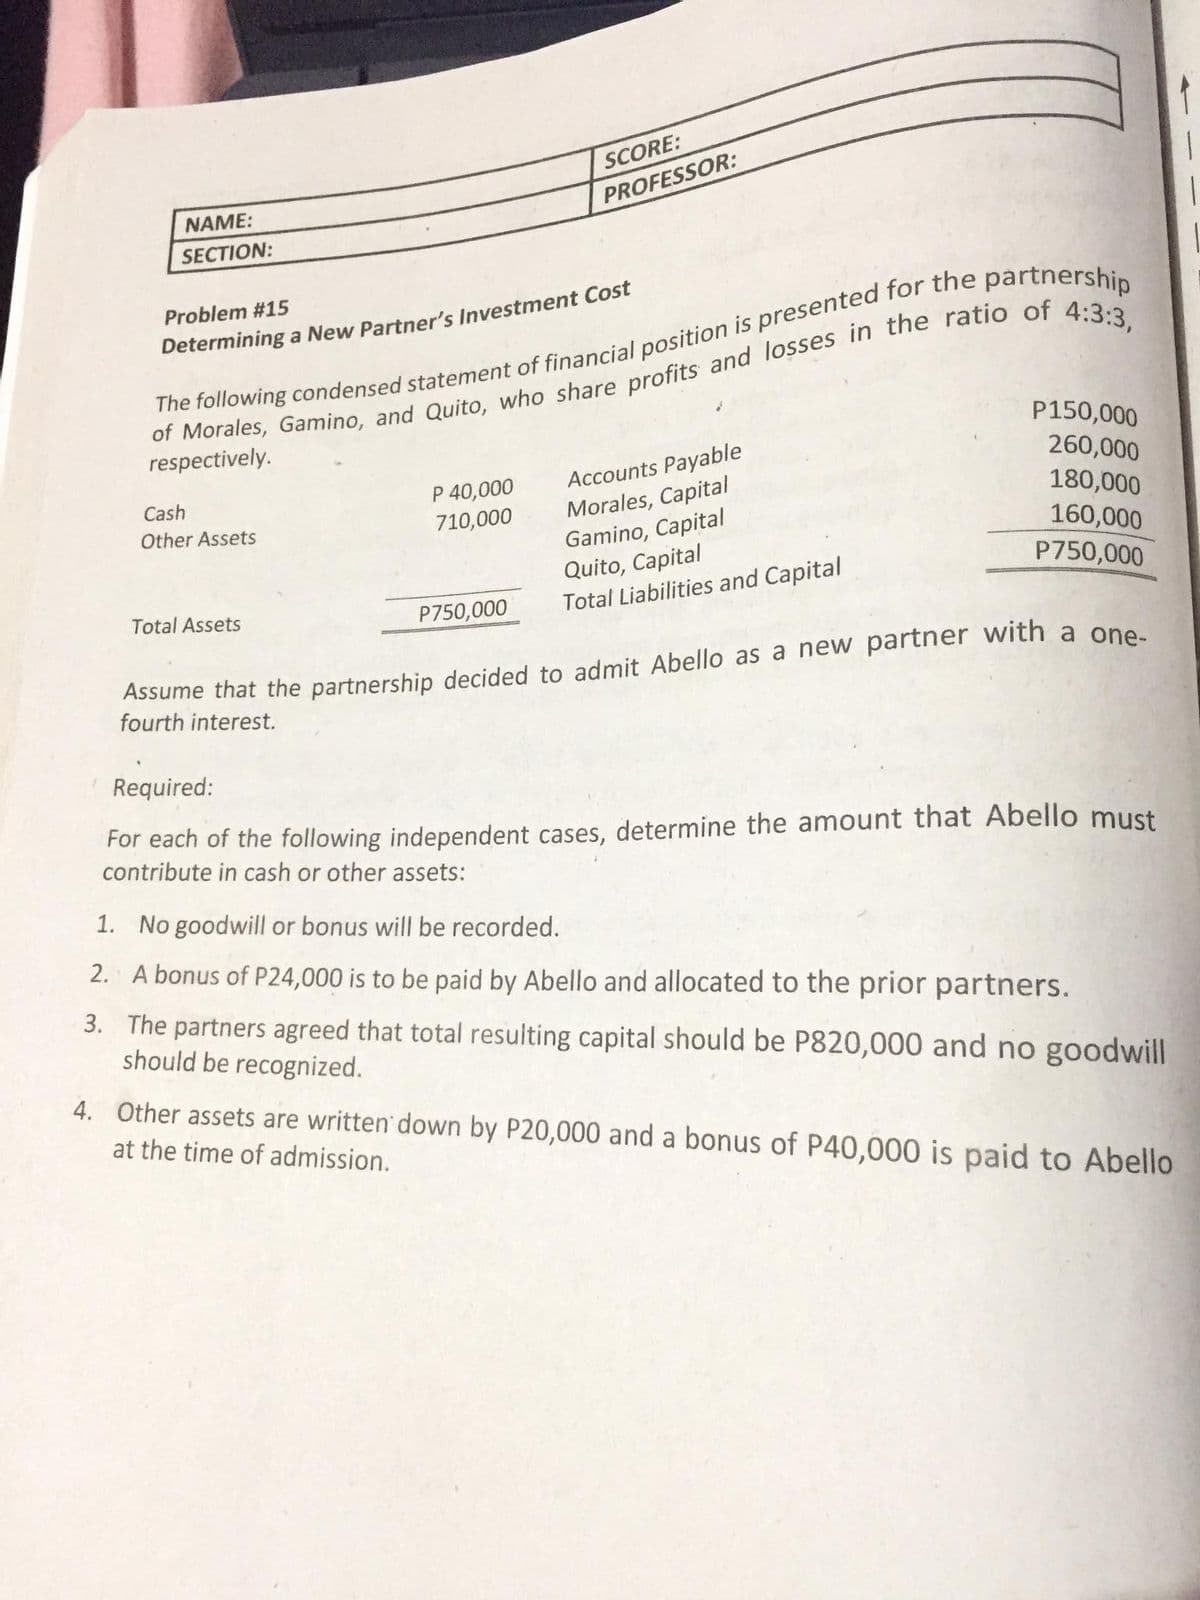 SCORE:
NAME:
PROFESSOR:
SECTION:
Problem #15
Determining a New Partner's Investment Cost
respectively.
P150,000
Accounts Payable
Morales, Capital
Gamino, Capital
Quito, Capital
Total Liabilities and Capital
260,000
P 40,000
710,000
Cash
180,000
Other Assets
160,000
P750,000
Total Assets
P750,000
Assume that the partnership decided to admit Abello as a new partner with a one.
fourth interest.
Required:
For each of the following independent cases, determine the amount that Abello must
contribute in cash or other assets:
1. No goodwill or bonus will be recorded.
2. A bonus of P24,000 is to be paid by Abello and allocated to the prior partners.
3. The partners agreed that total resulting capital should be P820,000 and no goodwill
should be recognized.
4. Other assets are written down by P20,000 and a bonus of P40,000 is paid to Abello
at the time of admission.
